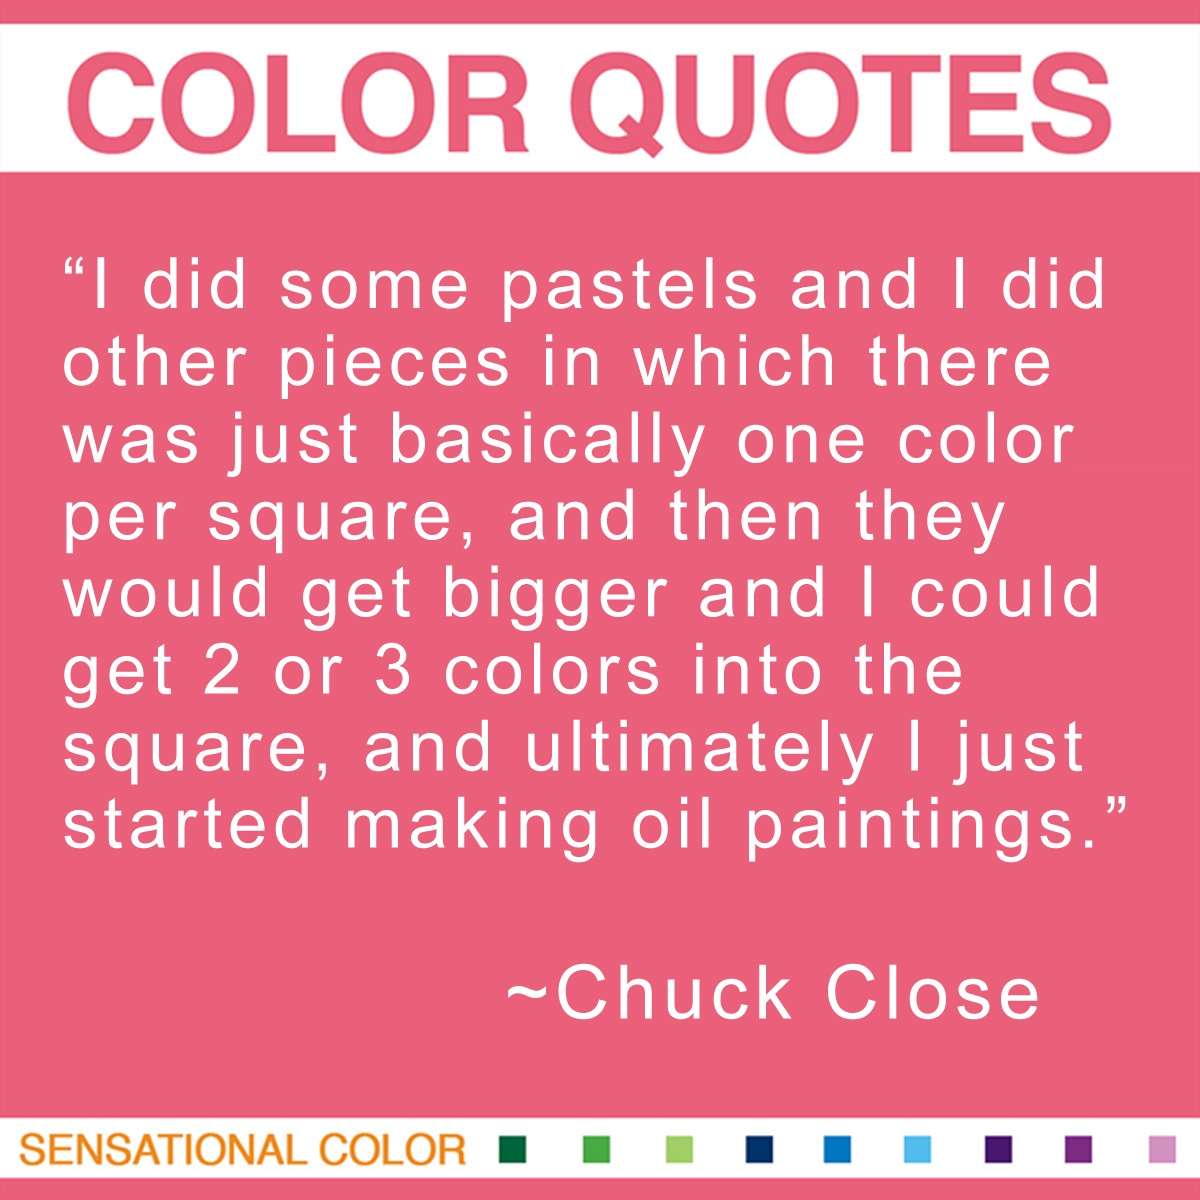 “I did some pastels and I did other pieces in which there was just basically one color per square, and then they would get bigger and I could get 2 or 3 colors into the square, and ultimately I just started making oil paintings.” - Chuck Close